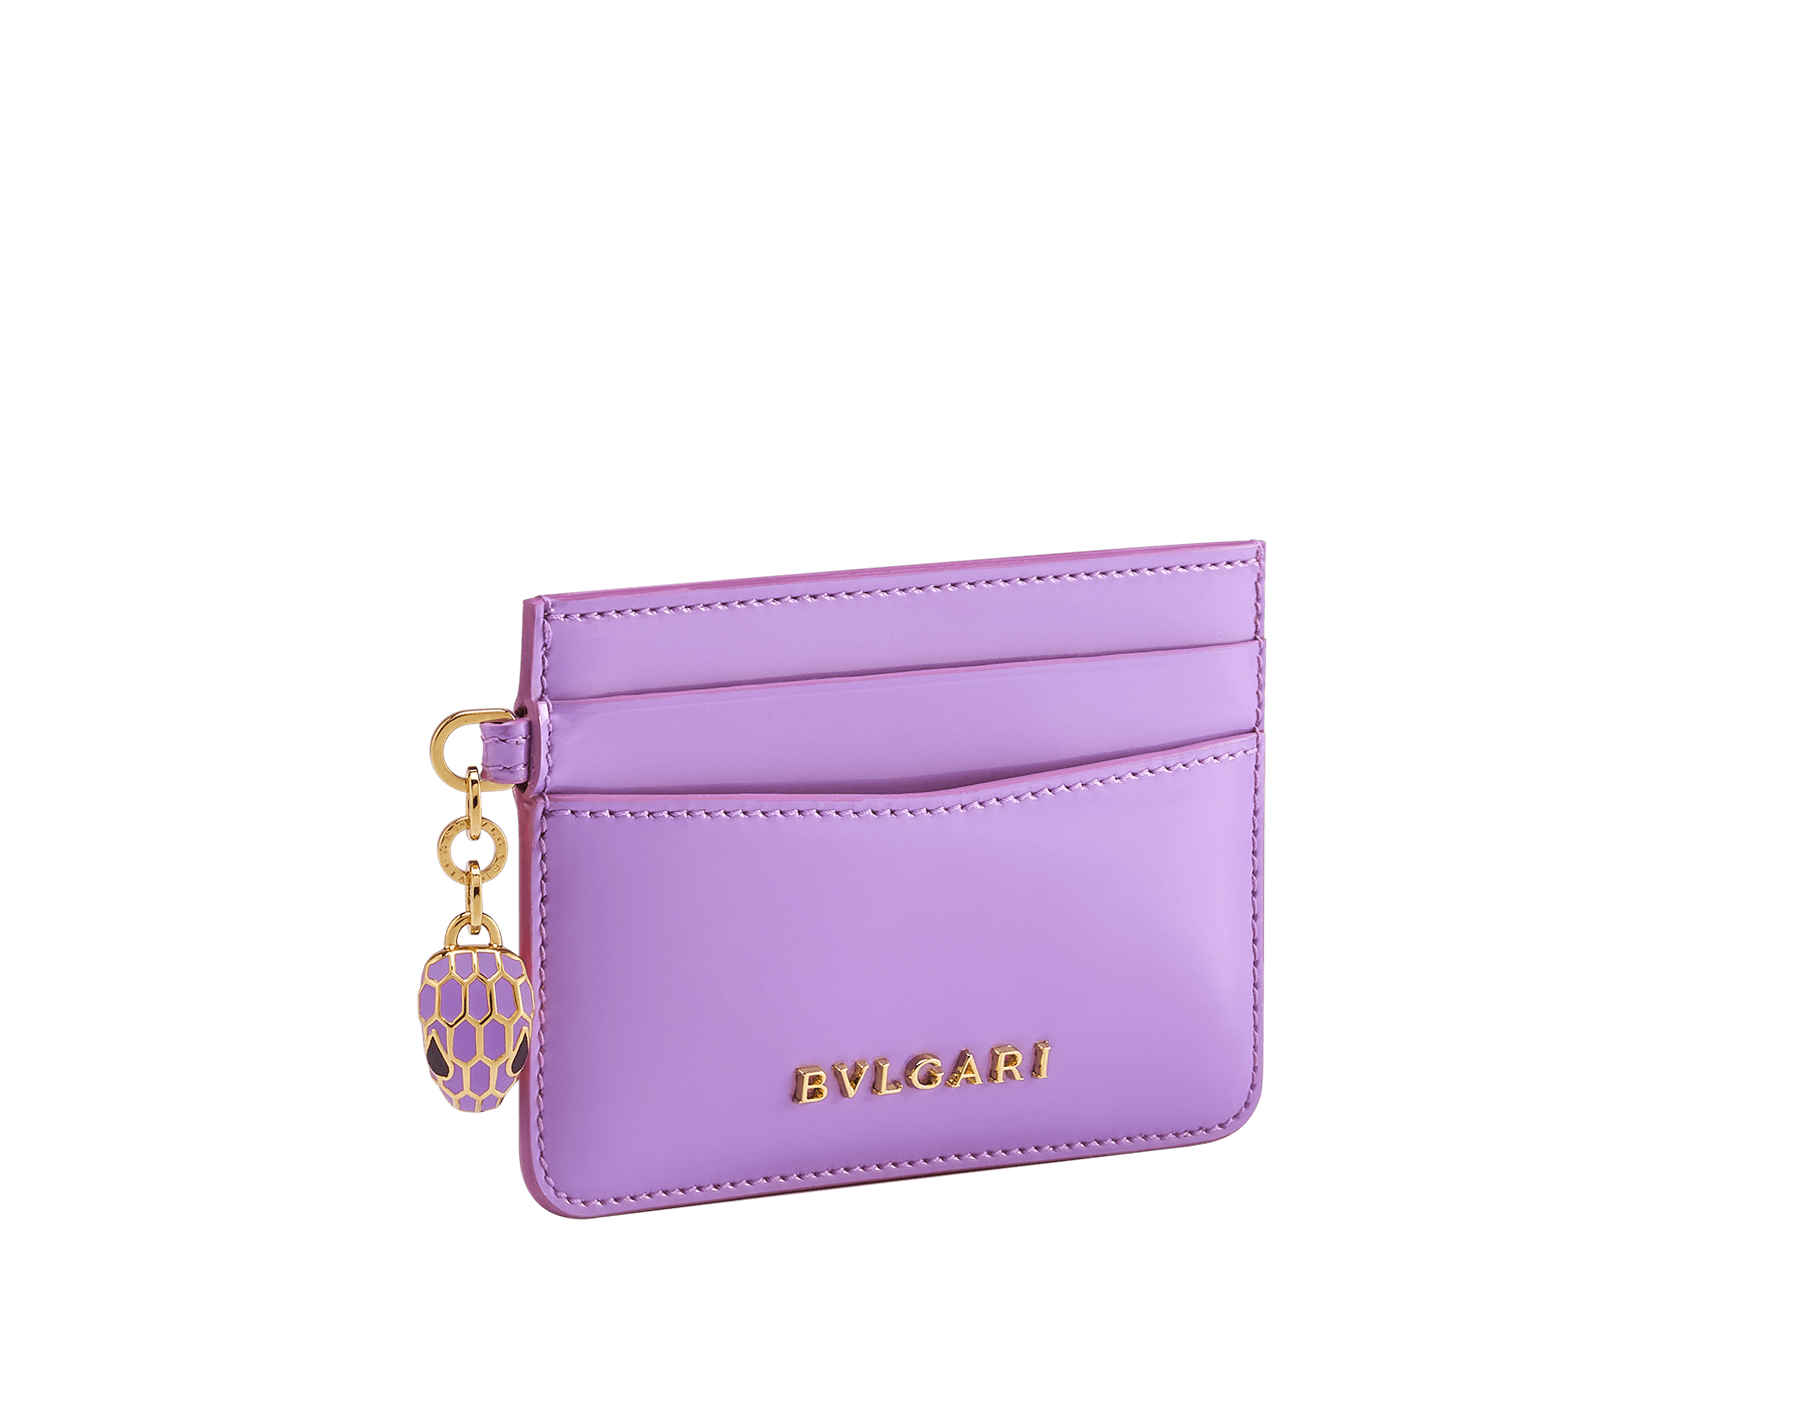 Serpenti Forever card holder in sheer amethyst lilac patent calf leather with black nappa leather lining. Captivating snakehead charm in gold-plated brass embellished with matt sheer amethyst lilac enamel scales and black enamel eyes. SEA-CC-HOLDER-VCL image 1